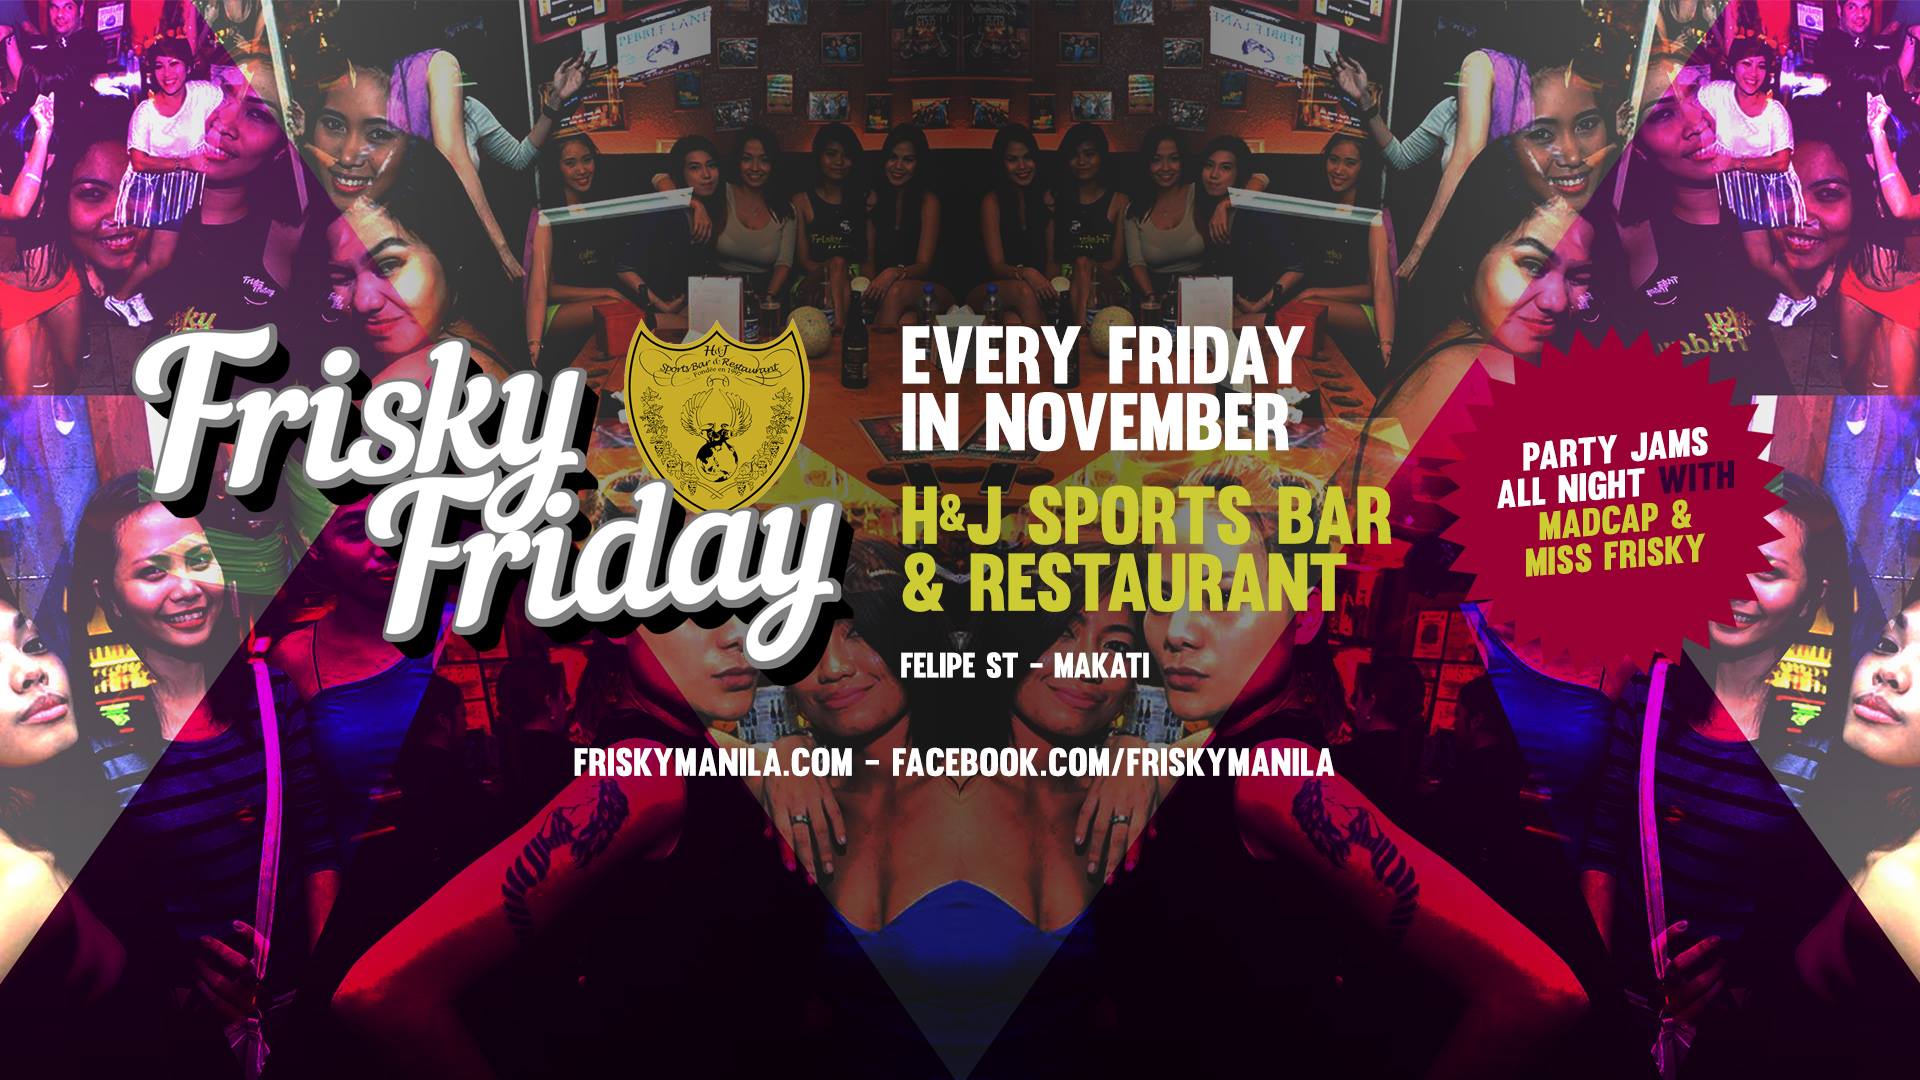 FRISKY FRIDAY ✦ 27 NOV clock Friday, November 27 at 10:00pm 4 days from now · 88°F / 75°F Partly Cloudy pin Show Map H&J Sports Bar and Restaurant Makati Felipe street, 1200 Makati, Philippines 10PM to late ✦ H&J Sports Bar & Restaurant ★★★★★★★★★★★★★★★★★★★★★ Hosted by: Lyn Joy Roble (aka Miss Frisky), Madcap & The Frisky Babes. Every Friday night at H&J Sports Bar & Restaurant, Frisky Manila hosts Makati's #1 sports bar party, FRISKY FRIDAY. Come & meet our FRISKY BABES, join the weekly FRISKY GAME or dance like no-ones watching to all your favourite party jams provided by DJ Madcap & guests. H&J Sports Bar & Restaurant 5081 Felipe Street Poblacion, Makati City Ph: (02) 954 1130 VISIT/LIKE/FOLLOW/SUBSCRIBE TO US: ★★★★★★★★★★★★★★★★★★★★★ Web: http://friskymanila.com/ Facebook: http://facebook.com/friskymanila Instagram: http://instagram.com/friskymanila YouTube: http://YouTube.com/user/friskyfridayMNL Twitter: http://twitter.com/friskymanila Google+: https://plus.google.com/u/1/+FriskyManilaPresents